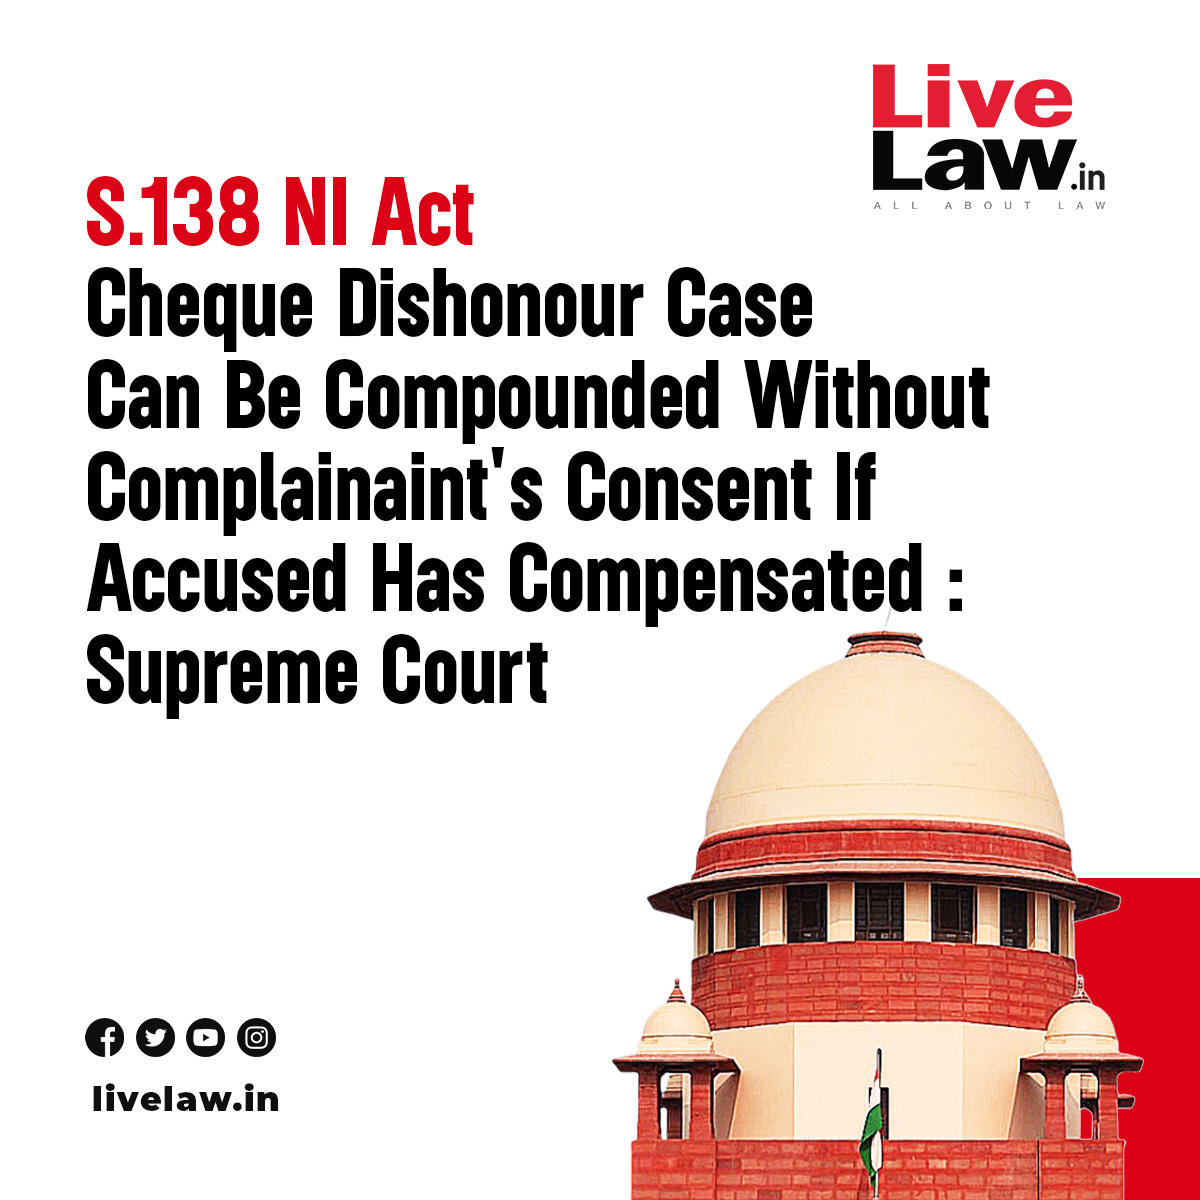 Recently, the Supreme Court observed that once the complainant is compensated by the accused against the dishonored cheque amount, then the consent of the complainant is not mandatory for compounding of the offence under the Negotiable Instruments Act, 1881 (“NI Act”).
Read more: